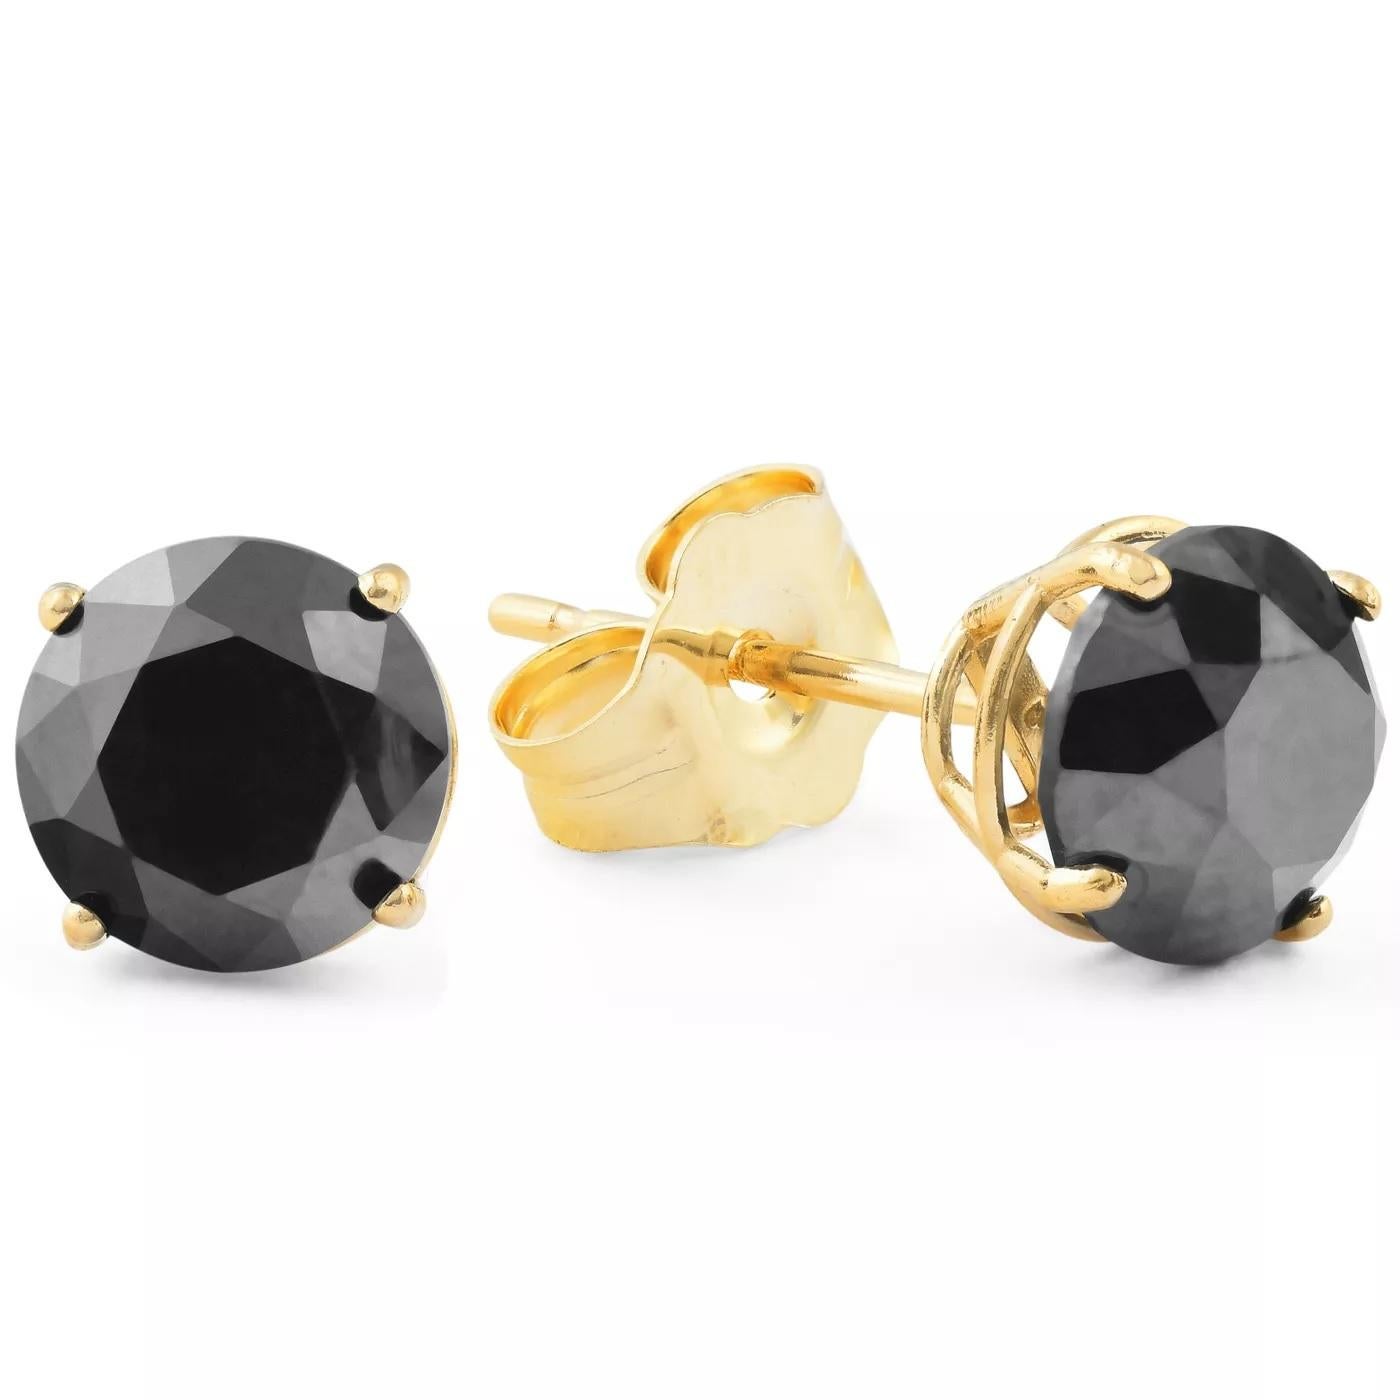 Alluring and refined, these diamond stud earrings are sure to be noticed. Created in 14 K yellow gold, the earring showcases a beguiling 1.55 carat natural black diamond solitaire measuring 6.73 x 6.79 x 4.52mm. Exquisitely made and Captivating with